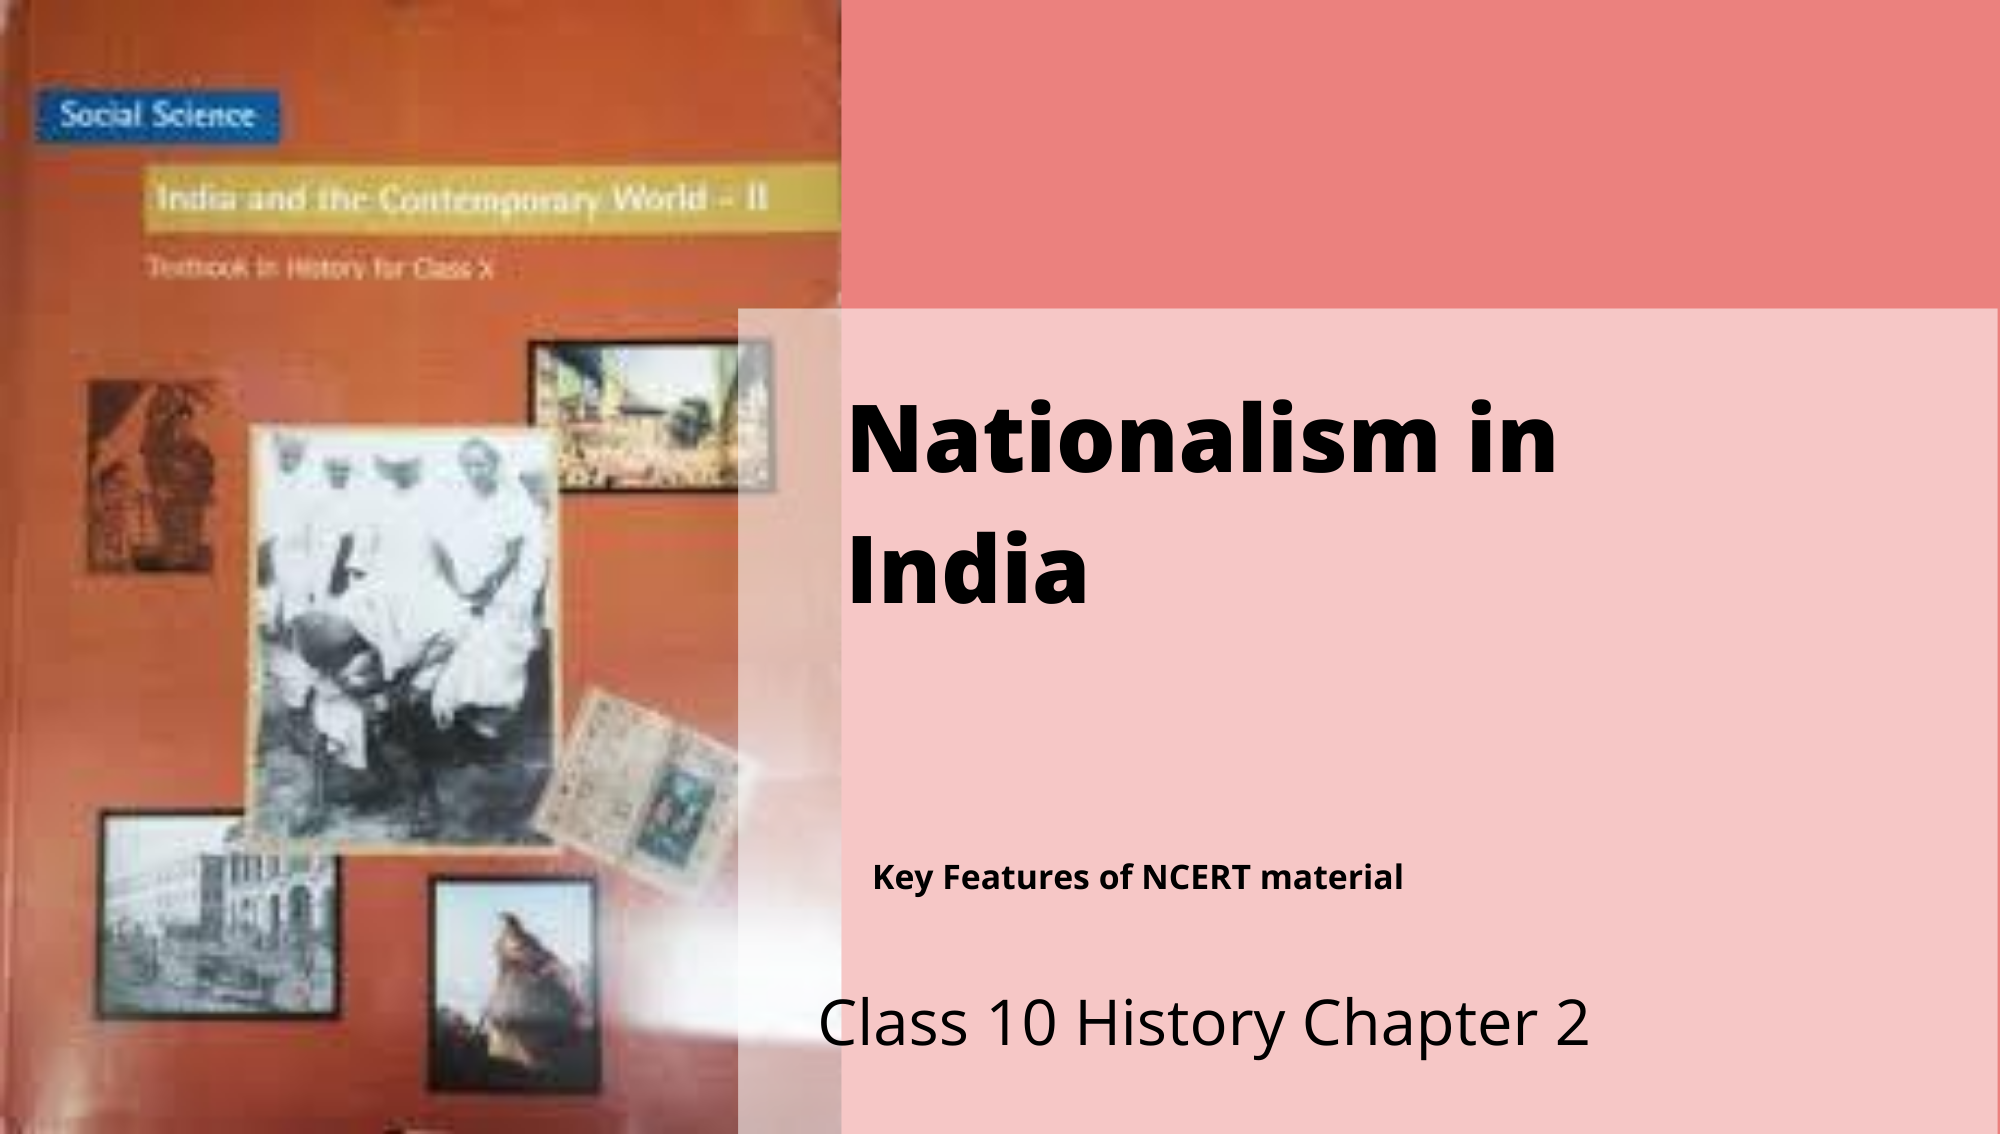 assignment on nationalism in india class 10